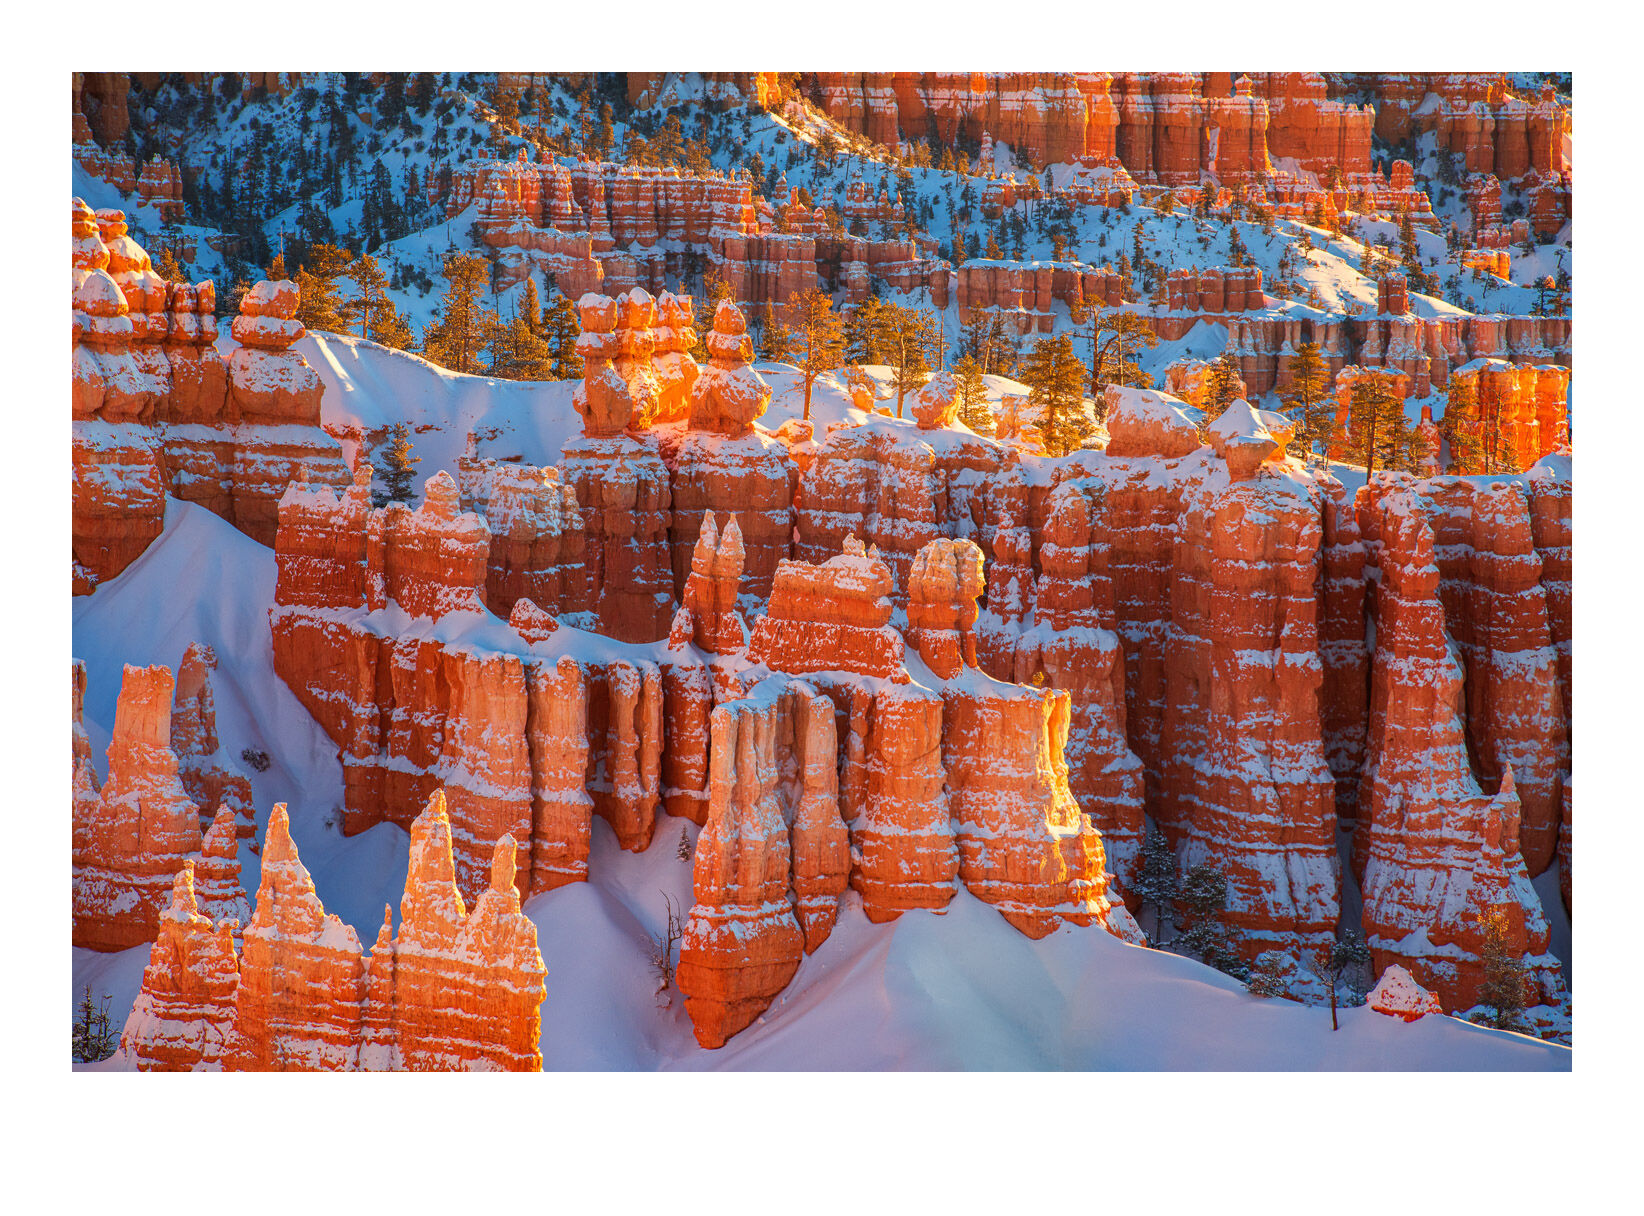 The hoodoos of Bryce Canyon glowing in sunrise light after a winter snowstorm the night before.